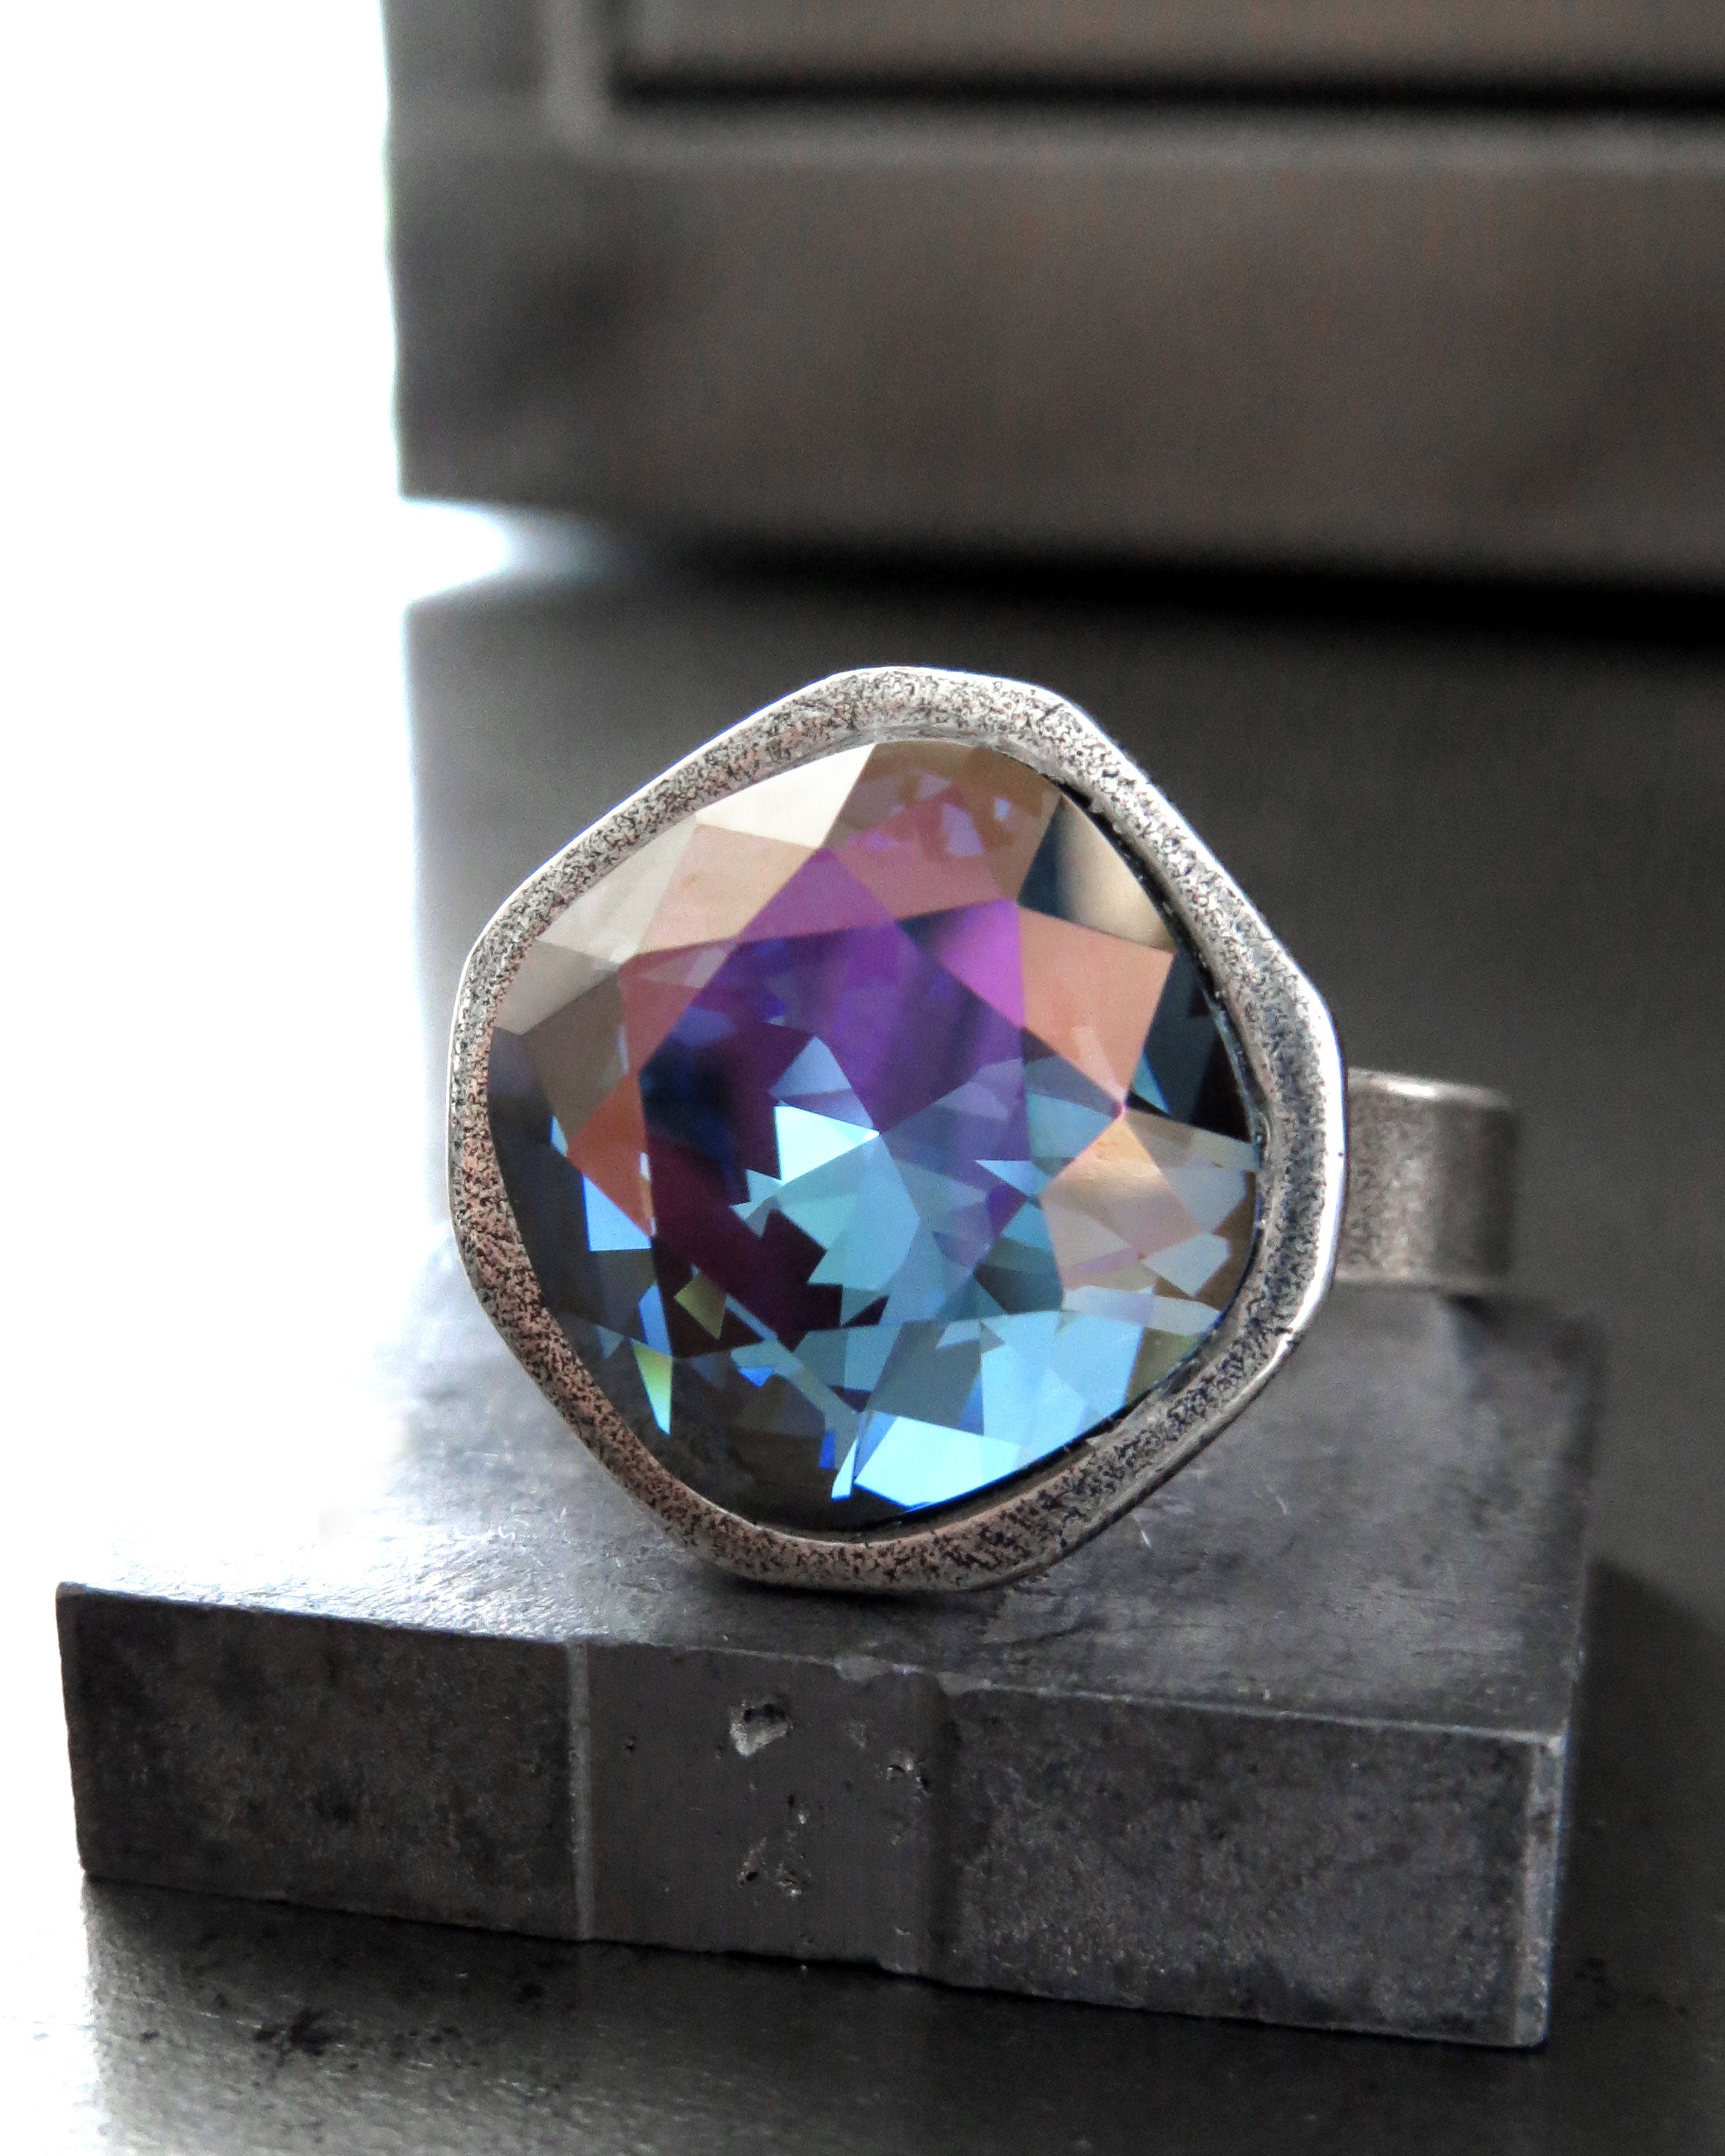 OUT of the DEPTHS - Crystal Ring in Aqua & Dark Blue